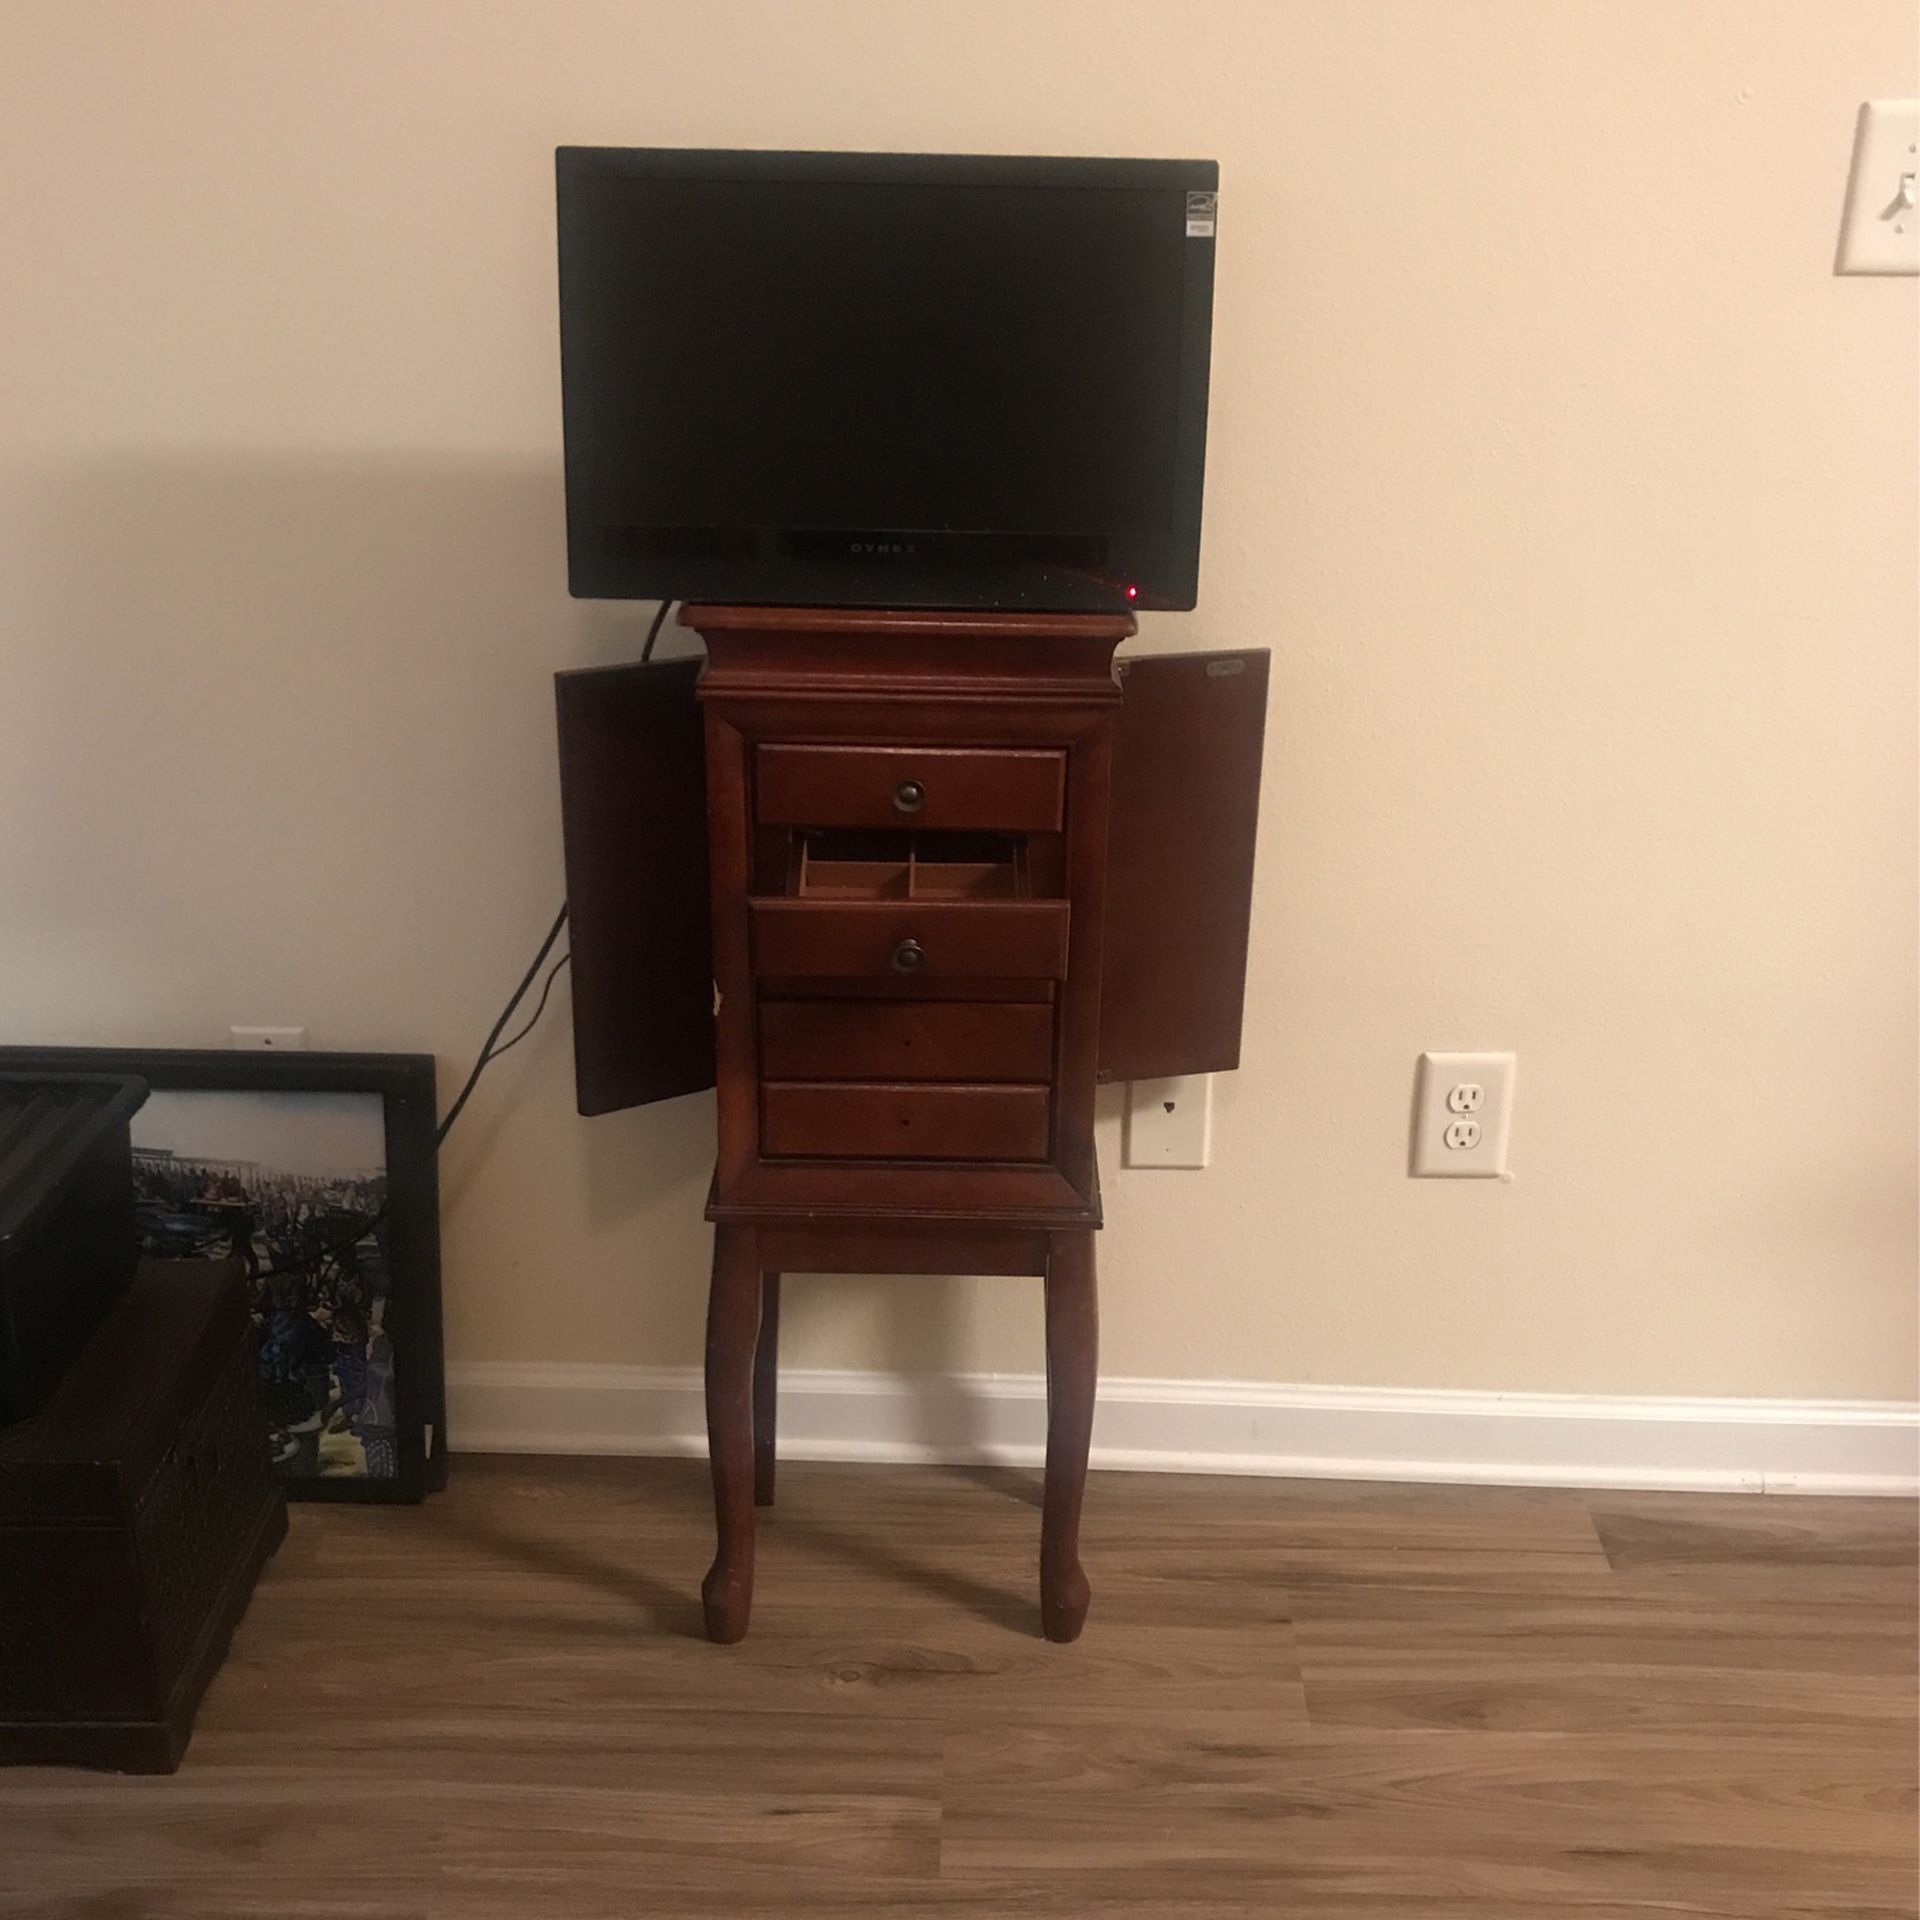 10inch TV and Jewelry Stand 